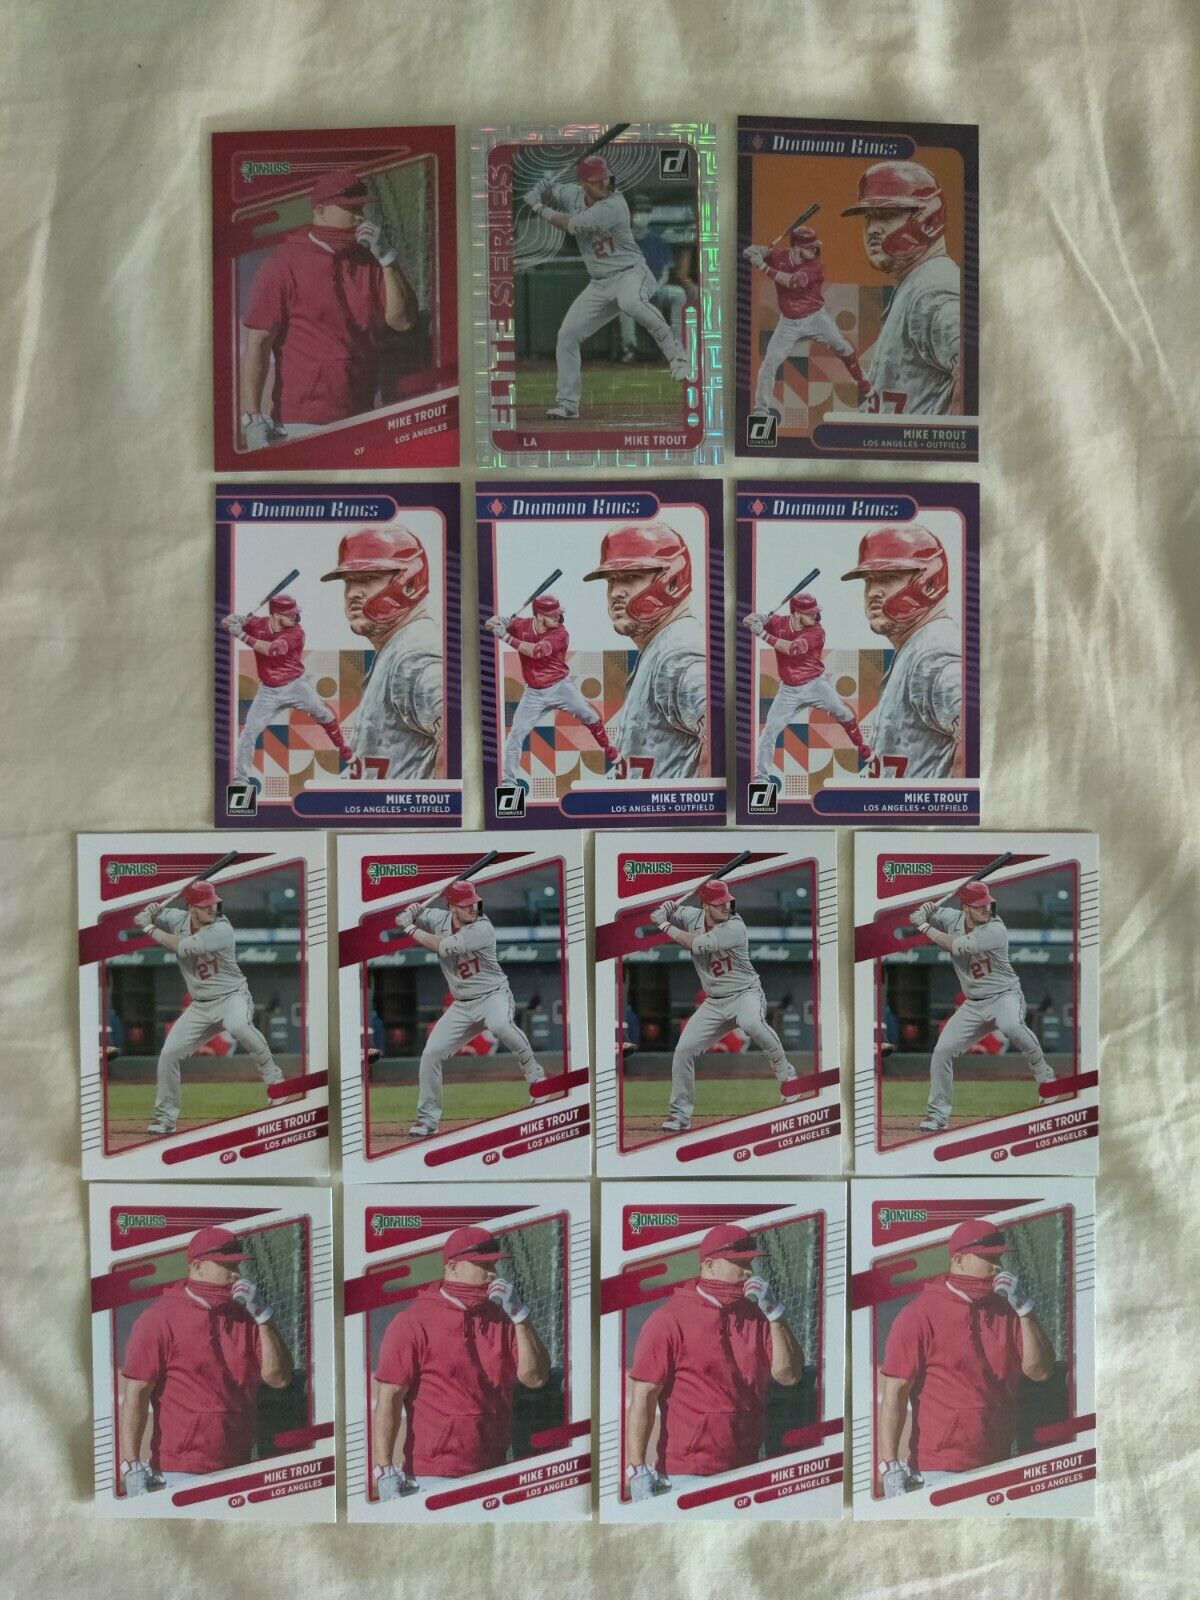 Mike Trout 2021 Donruss Baseball (14) card lot w/ Image Variation + Parallels